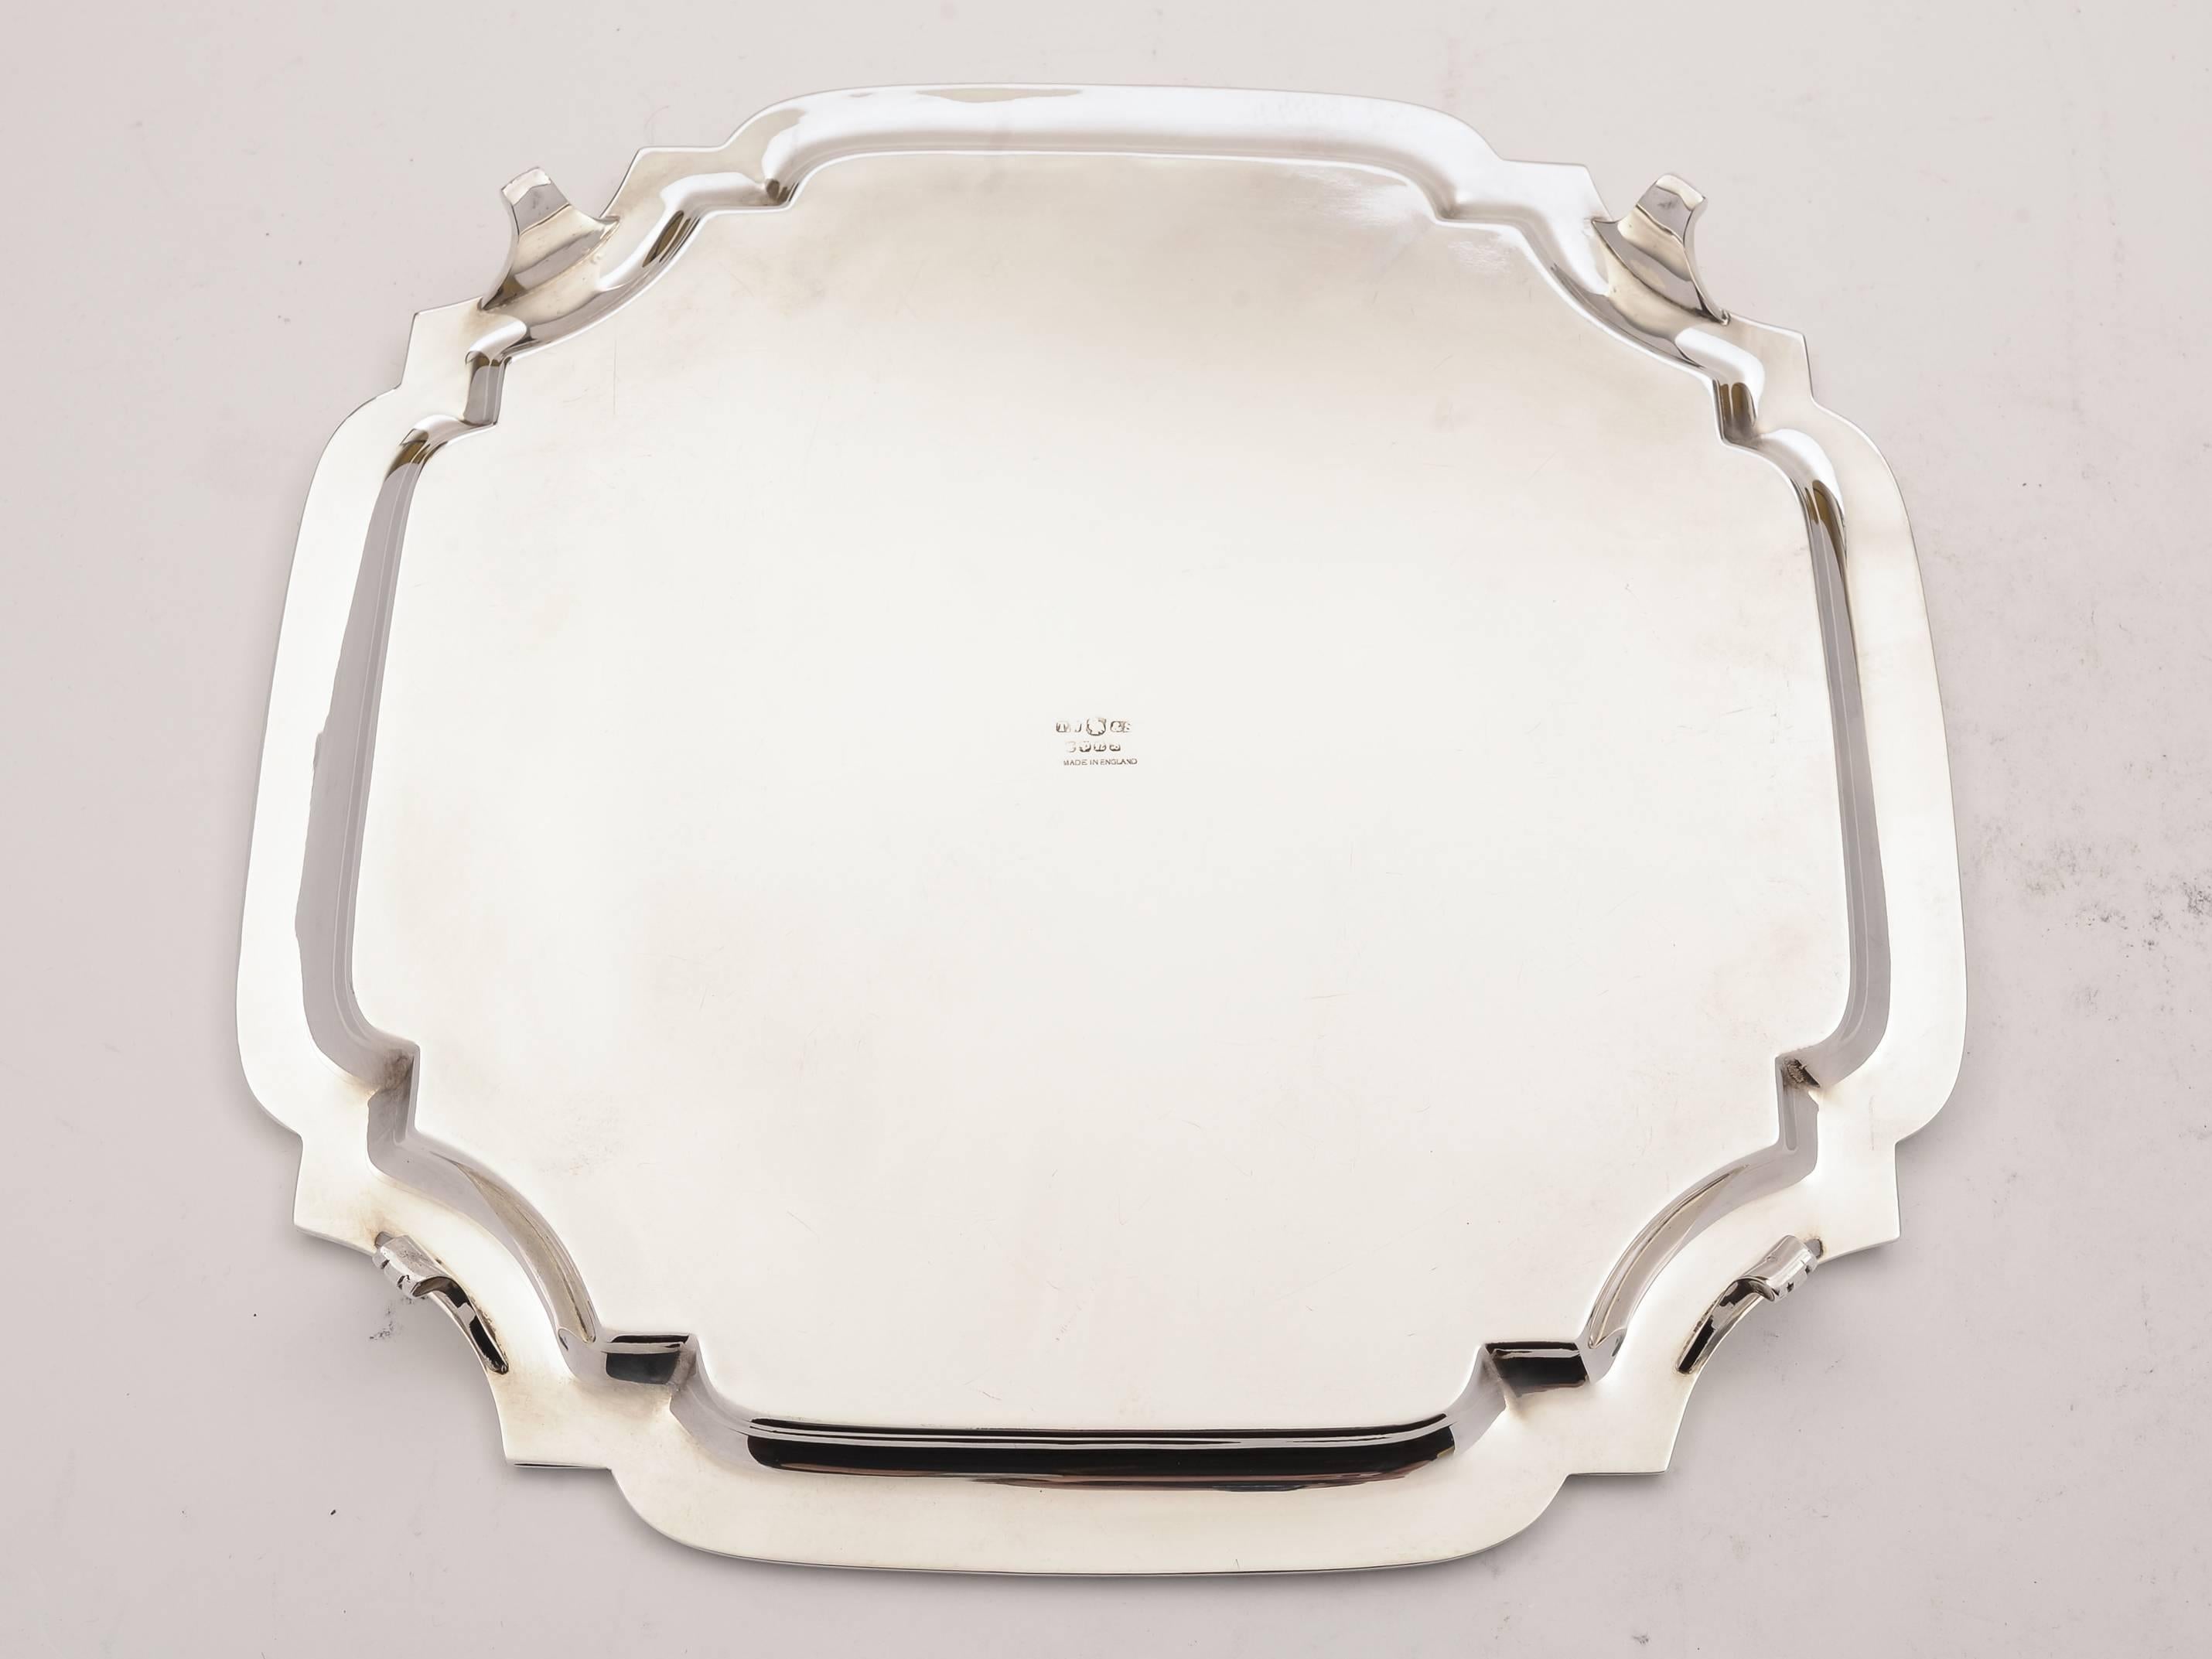 A lovely English Art Deco silver plated salver with shaped boarder and 4 shaped feet. Circa 1930.

FREE worldwide delivery.

Measurements:
Height: 1" (approx 2.5cm)
Length: 11 3/4" (approx 29.5cm)
Width: 11 3/4" (approx